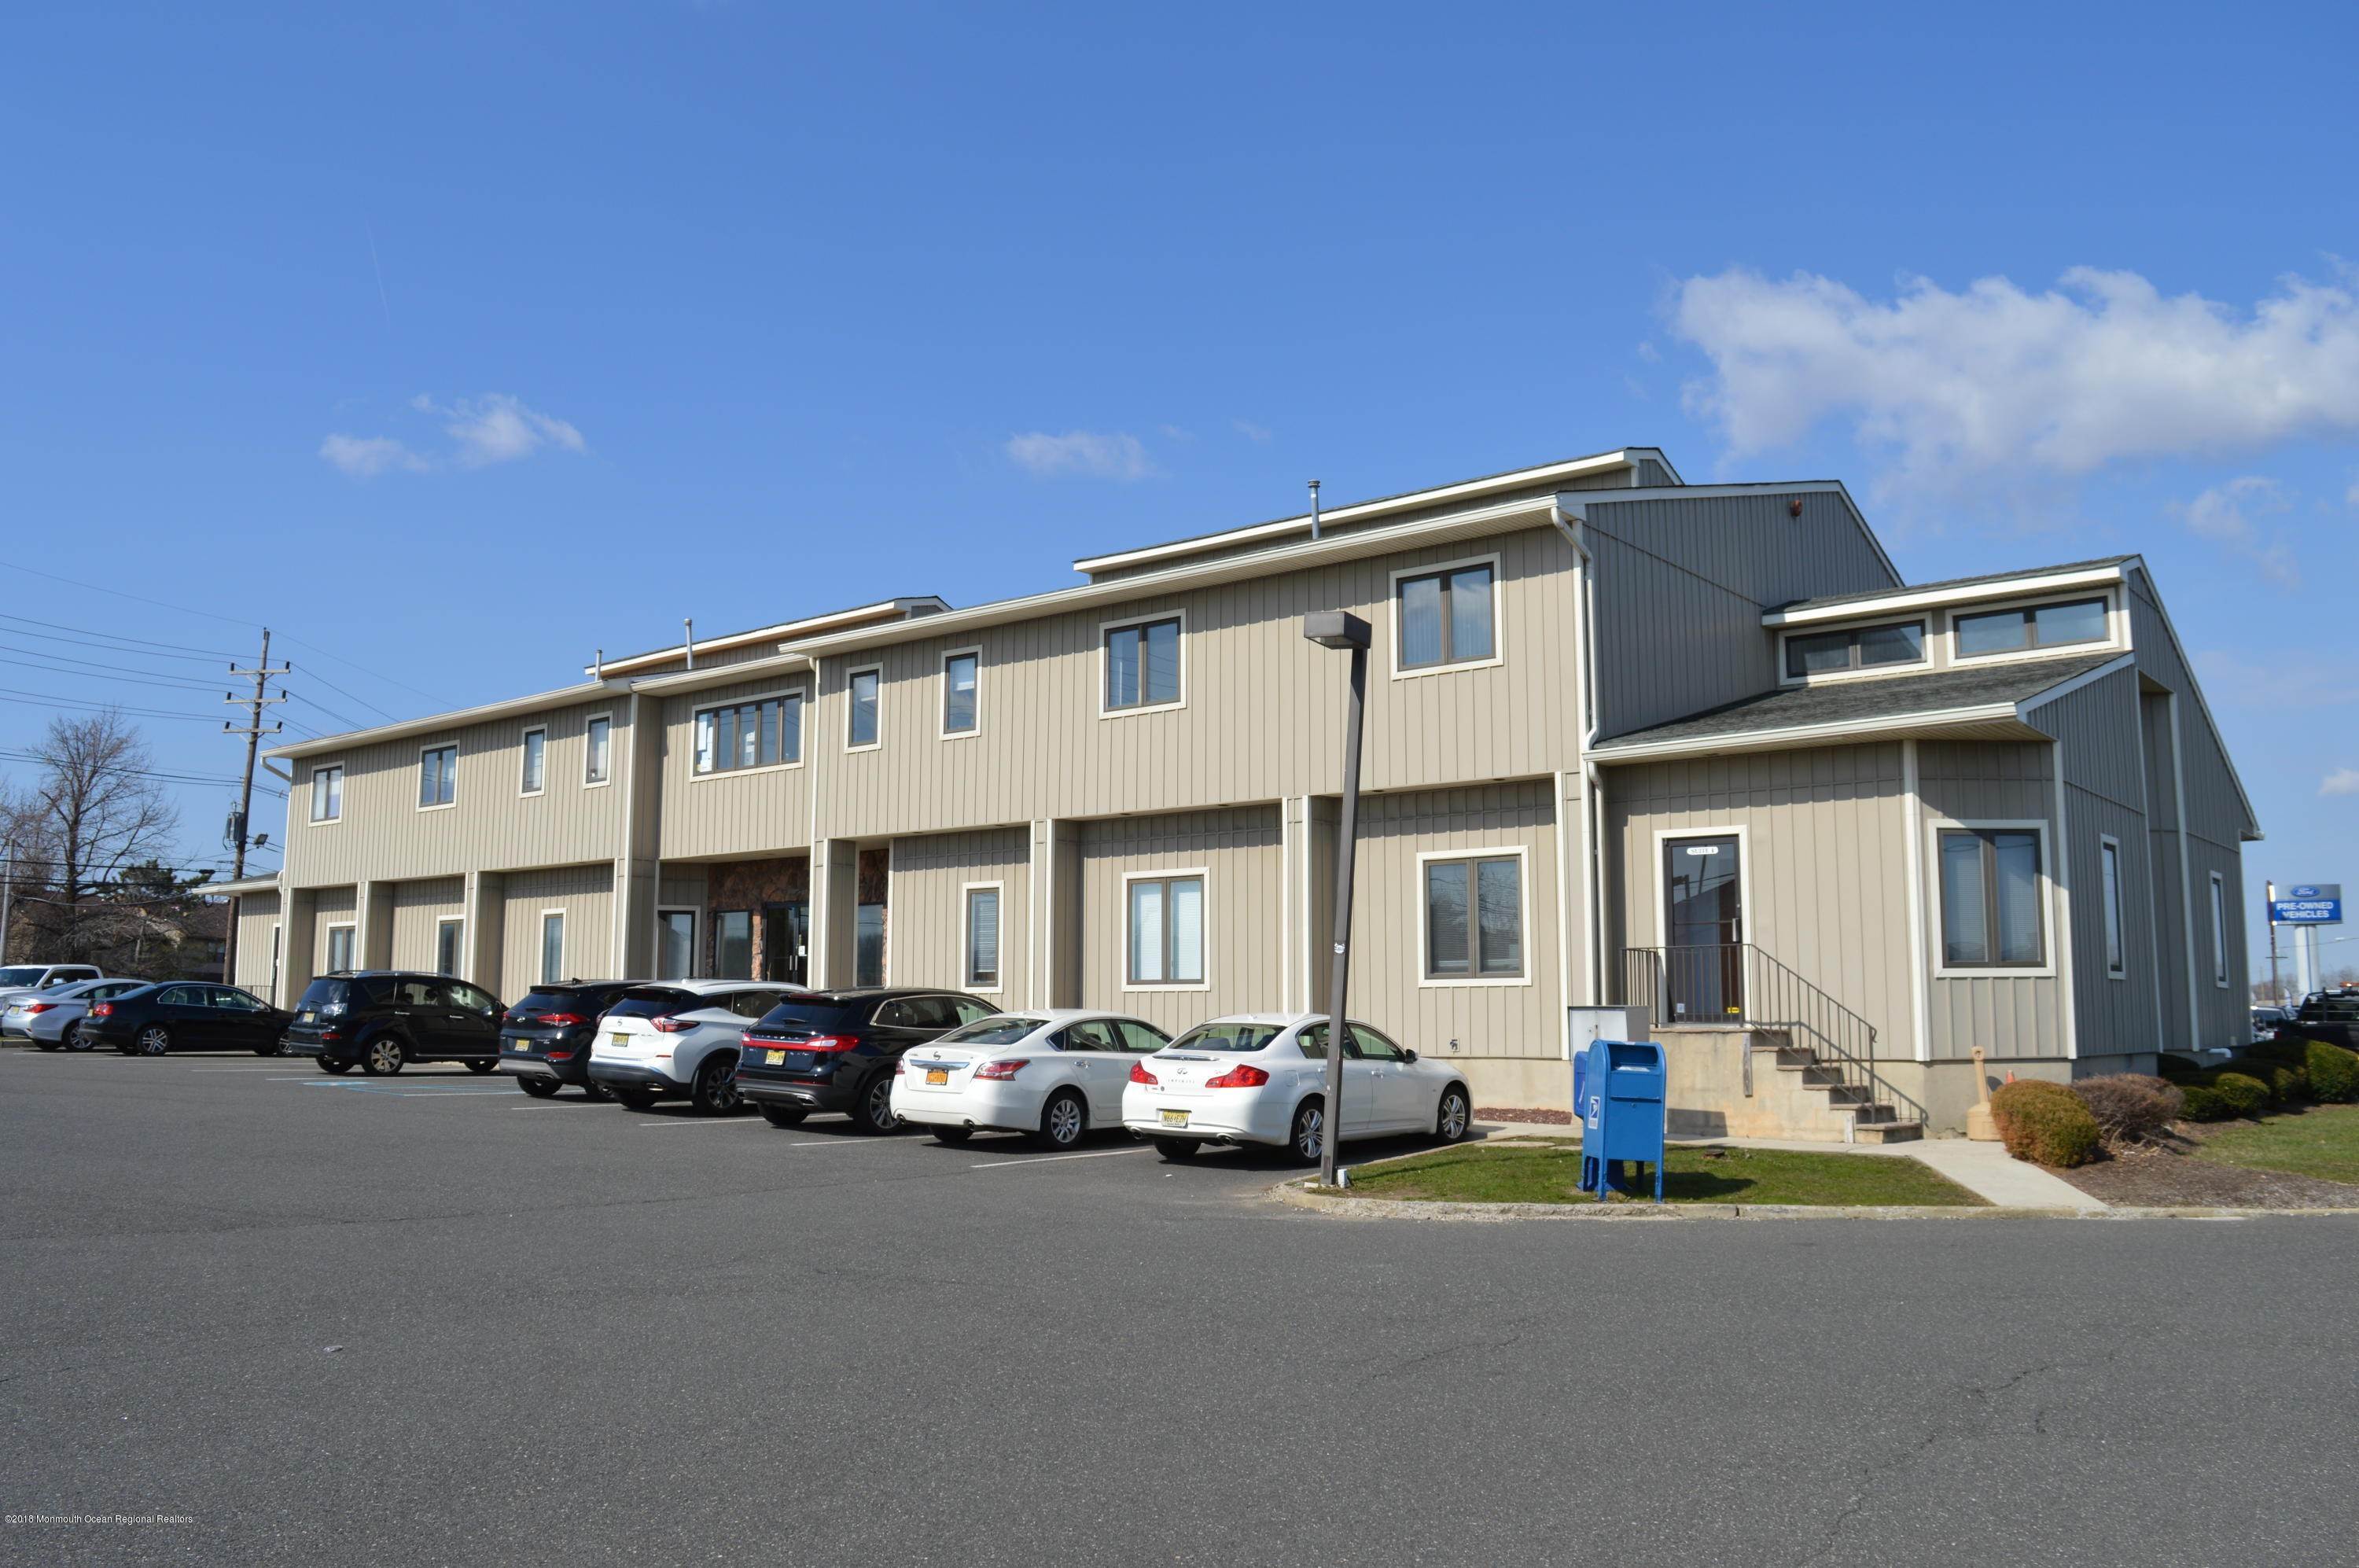 Commercial at 117 Highway 35 #1 & #2 Keyport, New Jersey 07735 United States